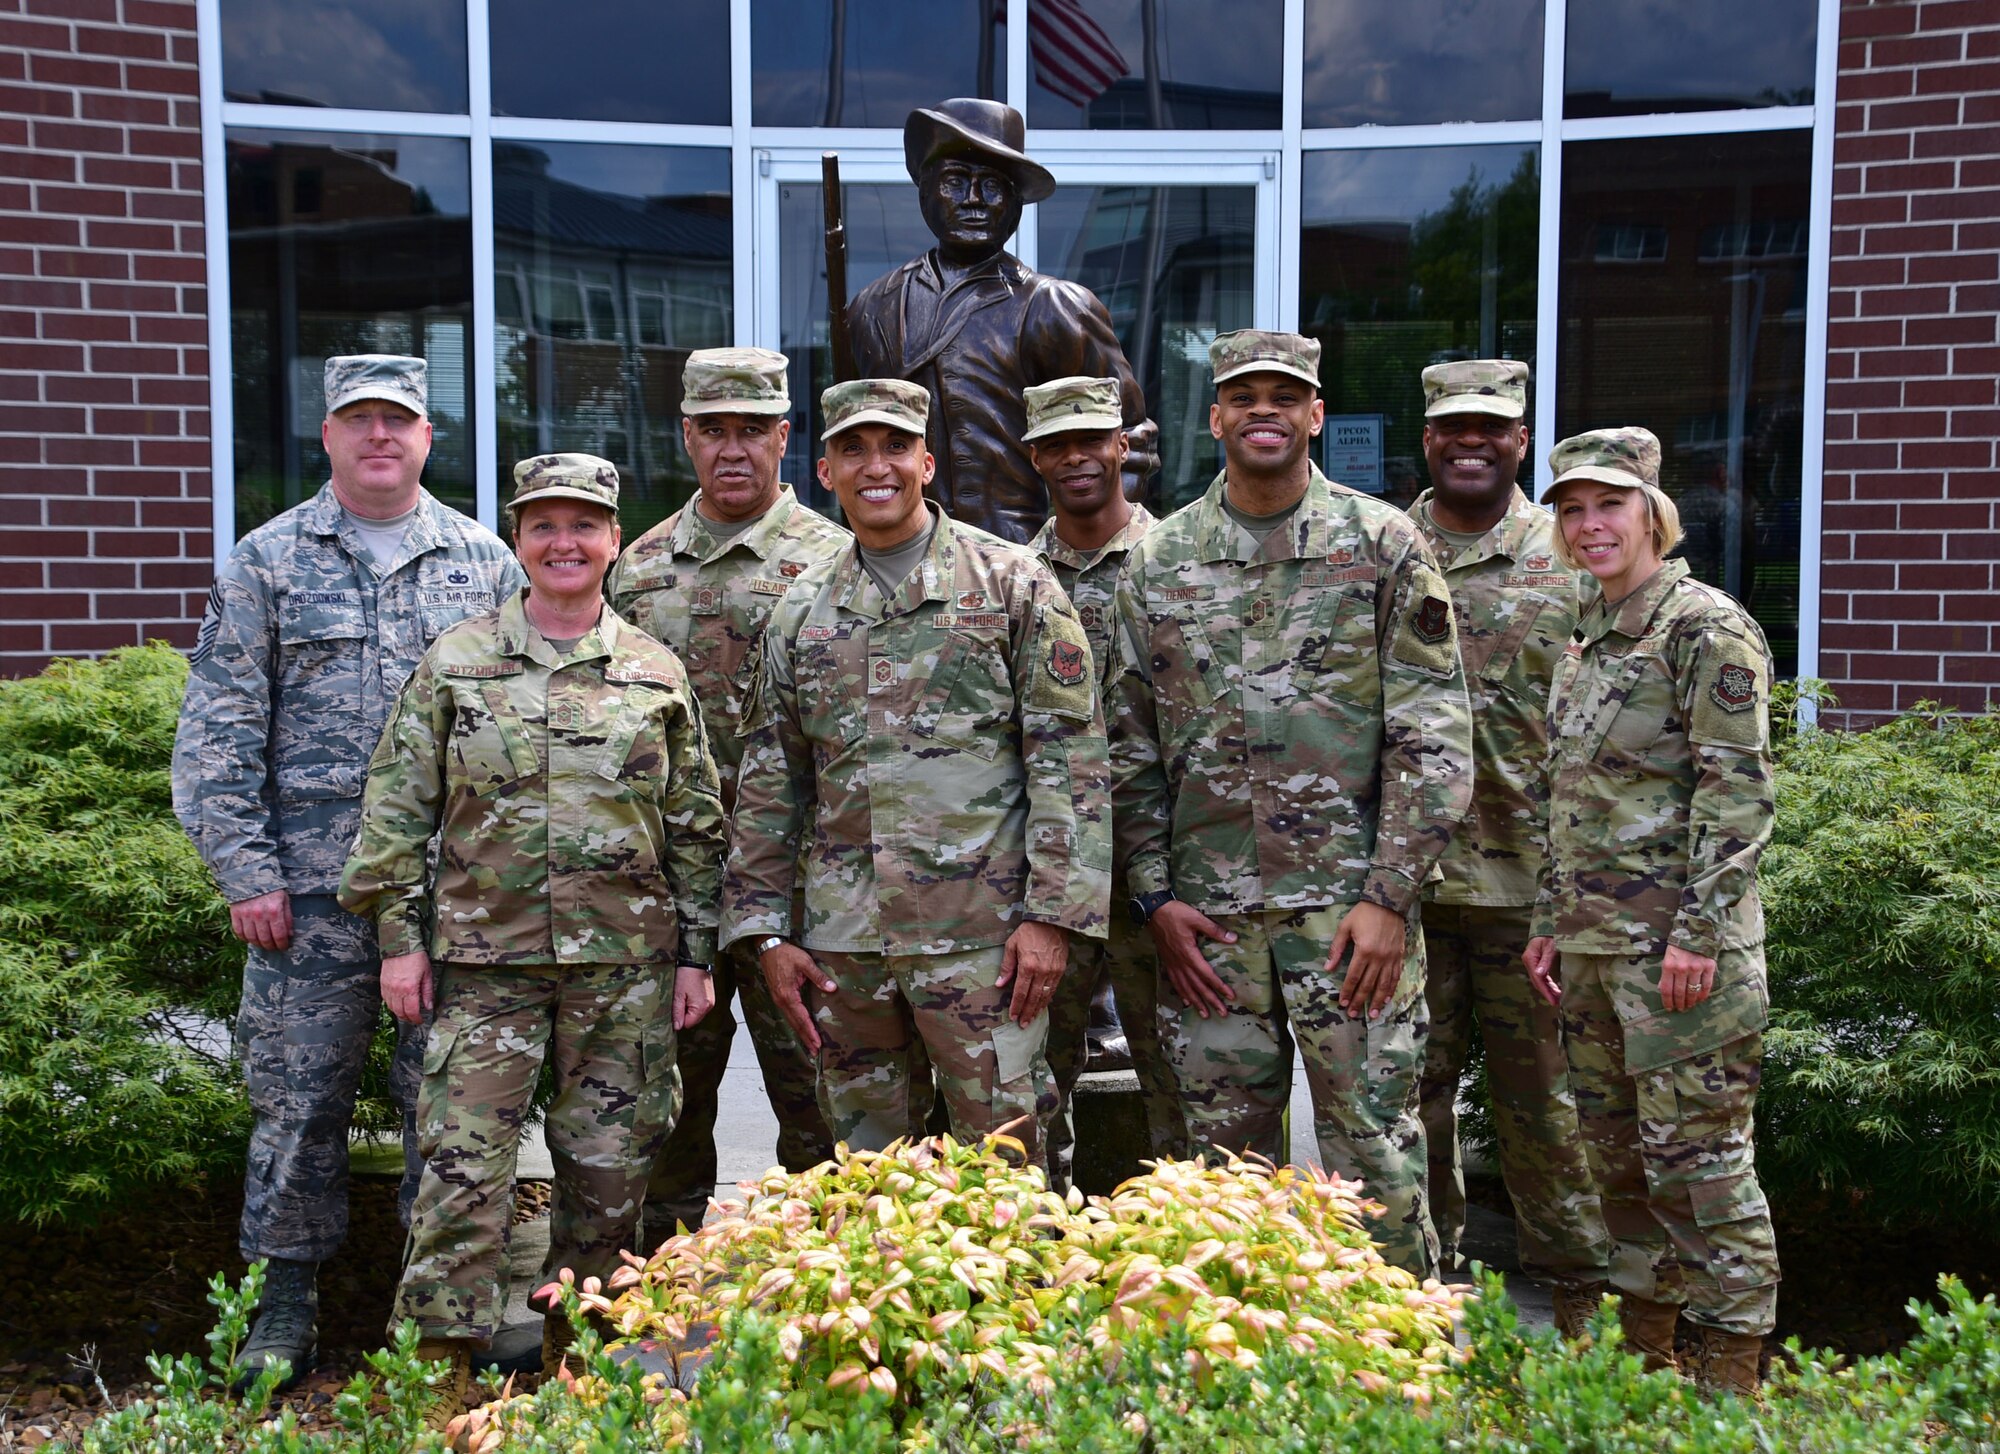 Leaders from the U.S. Air Force first sergeant community and the three wing command chief master sergeants from the Tennessee Air National Guard pose for a group photo July 23, 2019 at the I.G. Brown Training and Education Center on McGhee Tyson Air National Guard Base, Louisville, Tennessee. The leaders presented at a summit and symposium of first sergeants from across the Air Force that was organized by the Tennessee Air National Guard. (U.S. Air National Guard photo by Staff Sgt. Anthony Agosti)